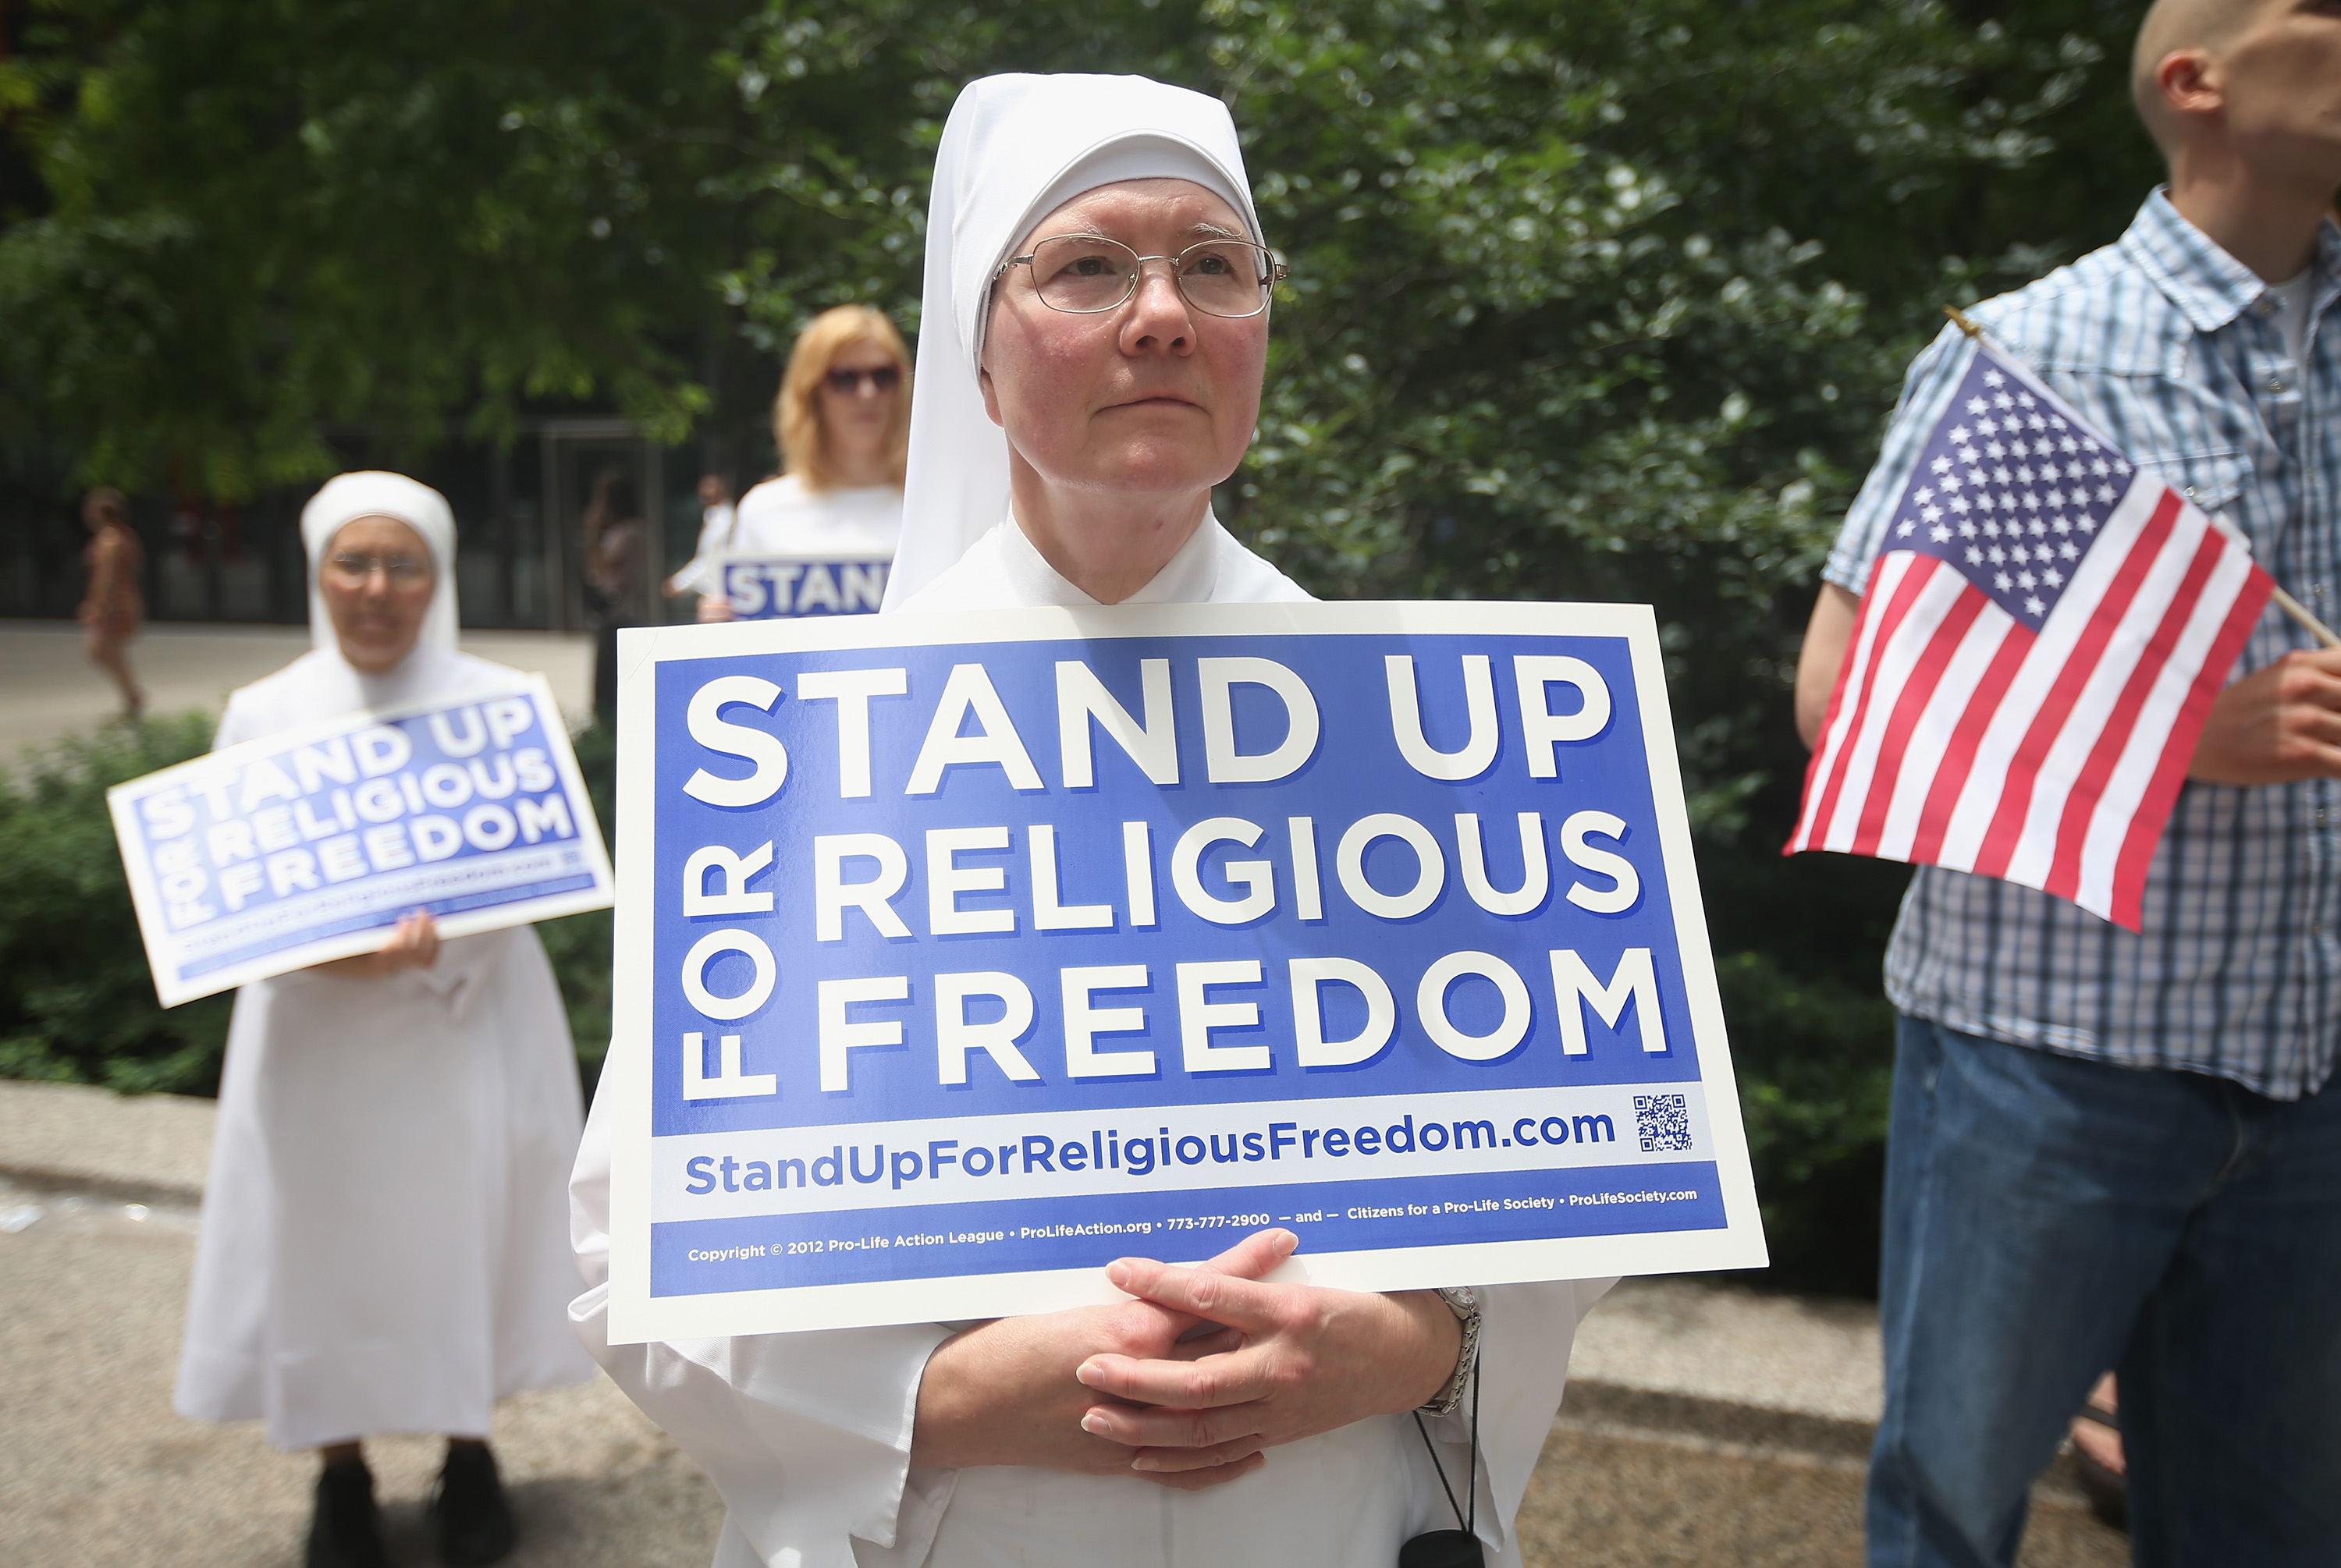 Sister Caroline attends a rally with other supporters of religious freedom to praise the Supreme Court's decision in the Hobby Lobby, contraception coverage requirement case on June 30, 2014 in Chicago, Illinois. (Scott Olson&mdash;Getty Images)